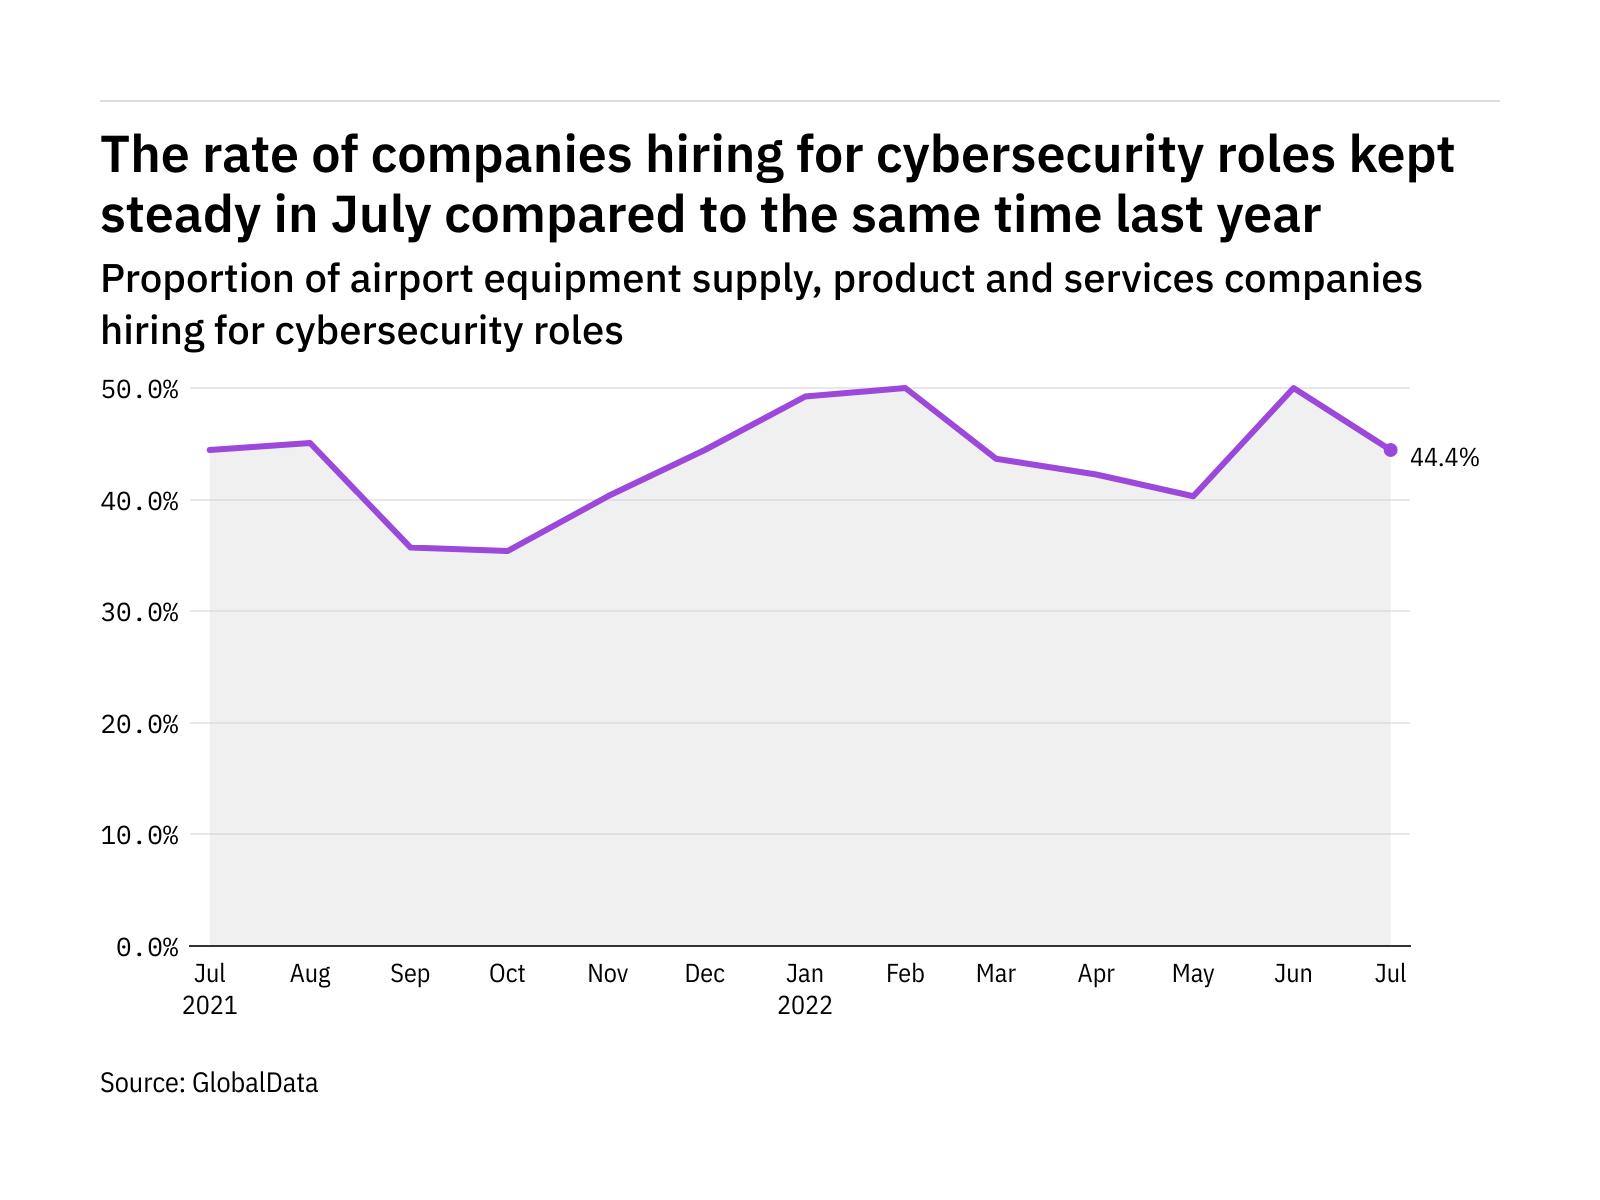 Cybersecurity hiring levels in the airport industry kept steady in July 2022